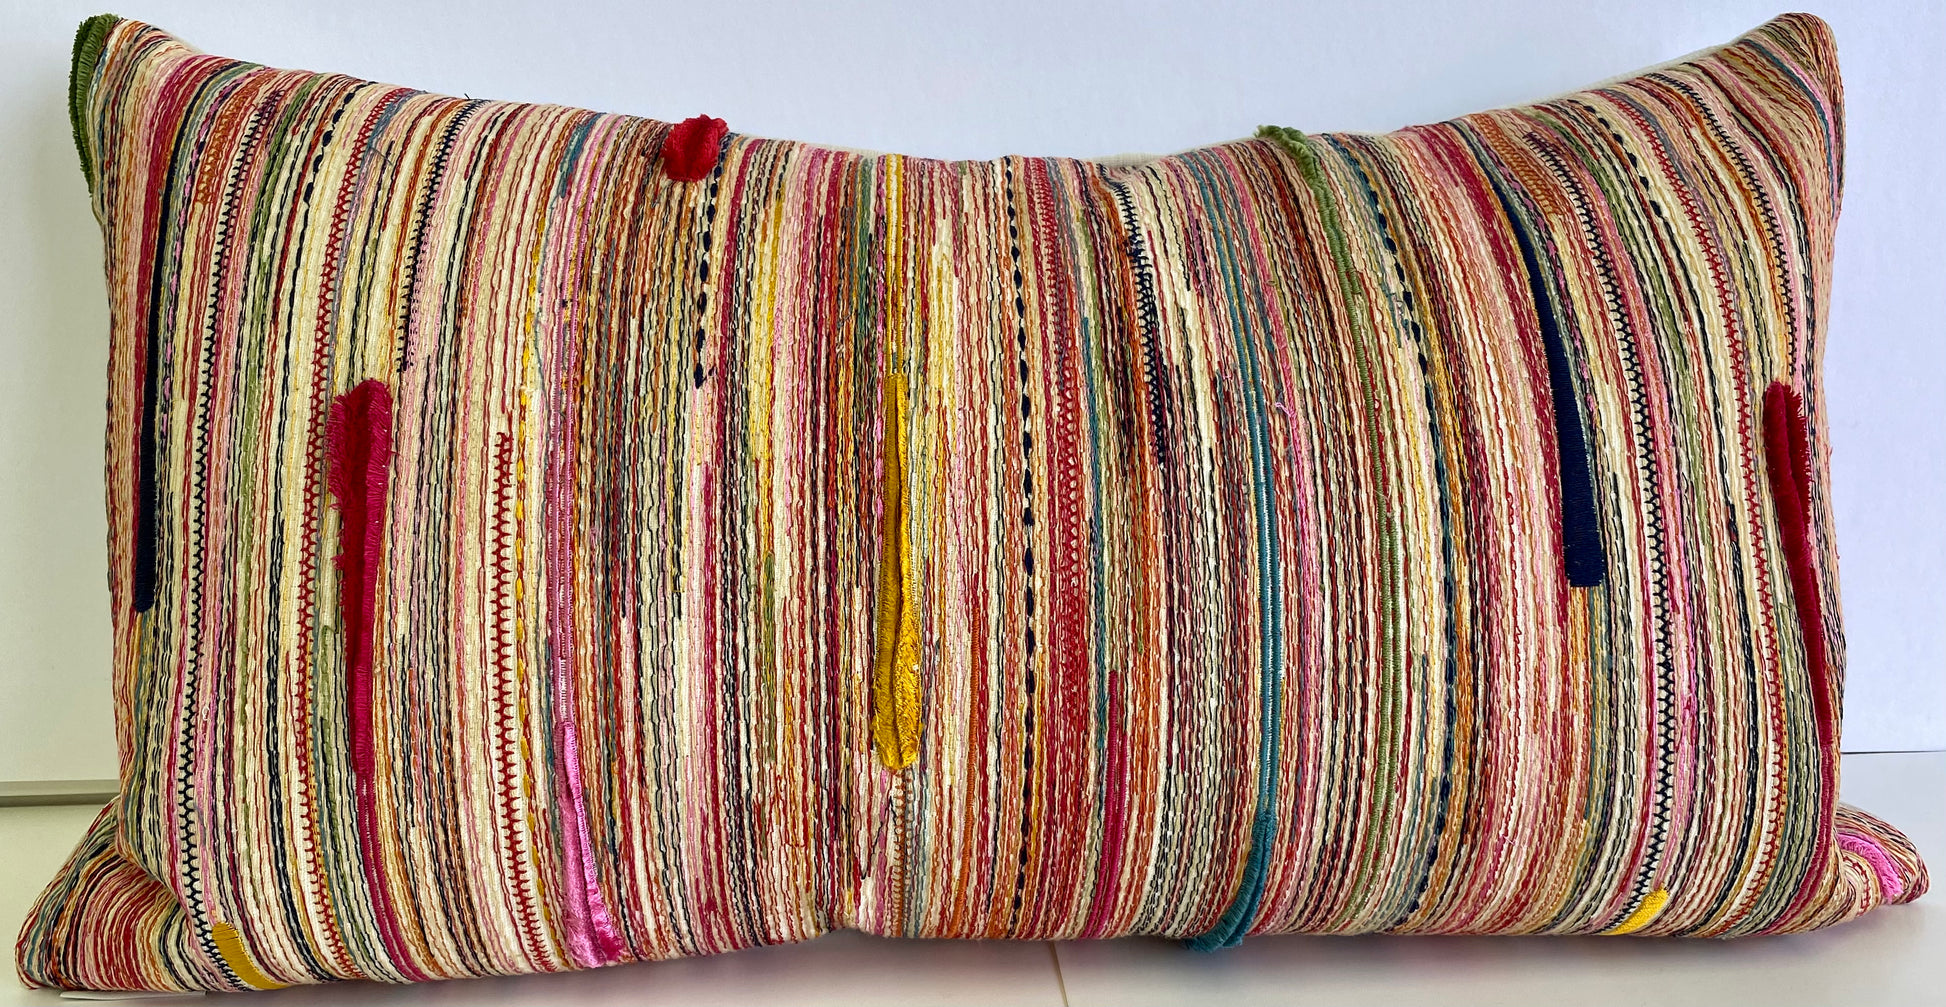 Luxury Lumbar Pillow - 24 x 14 - Dandy; A rainbow of embroidery with slubs